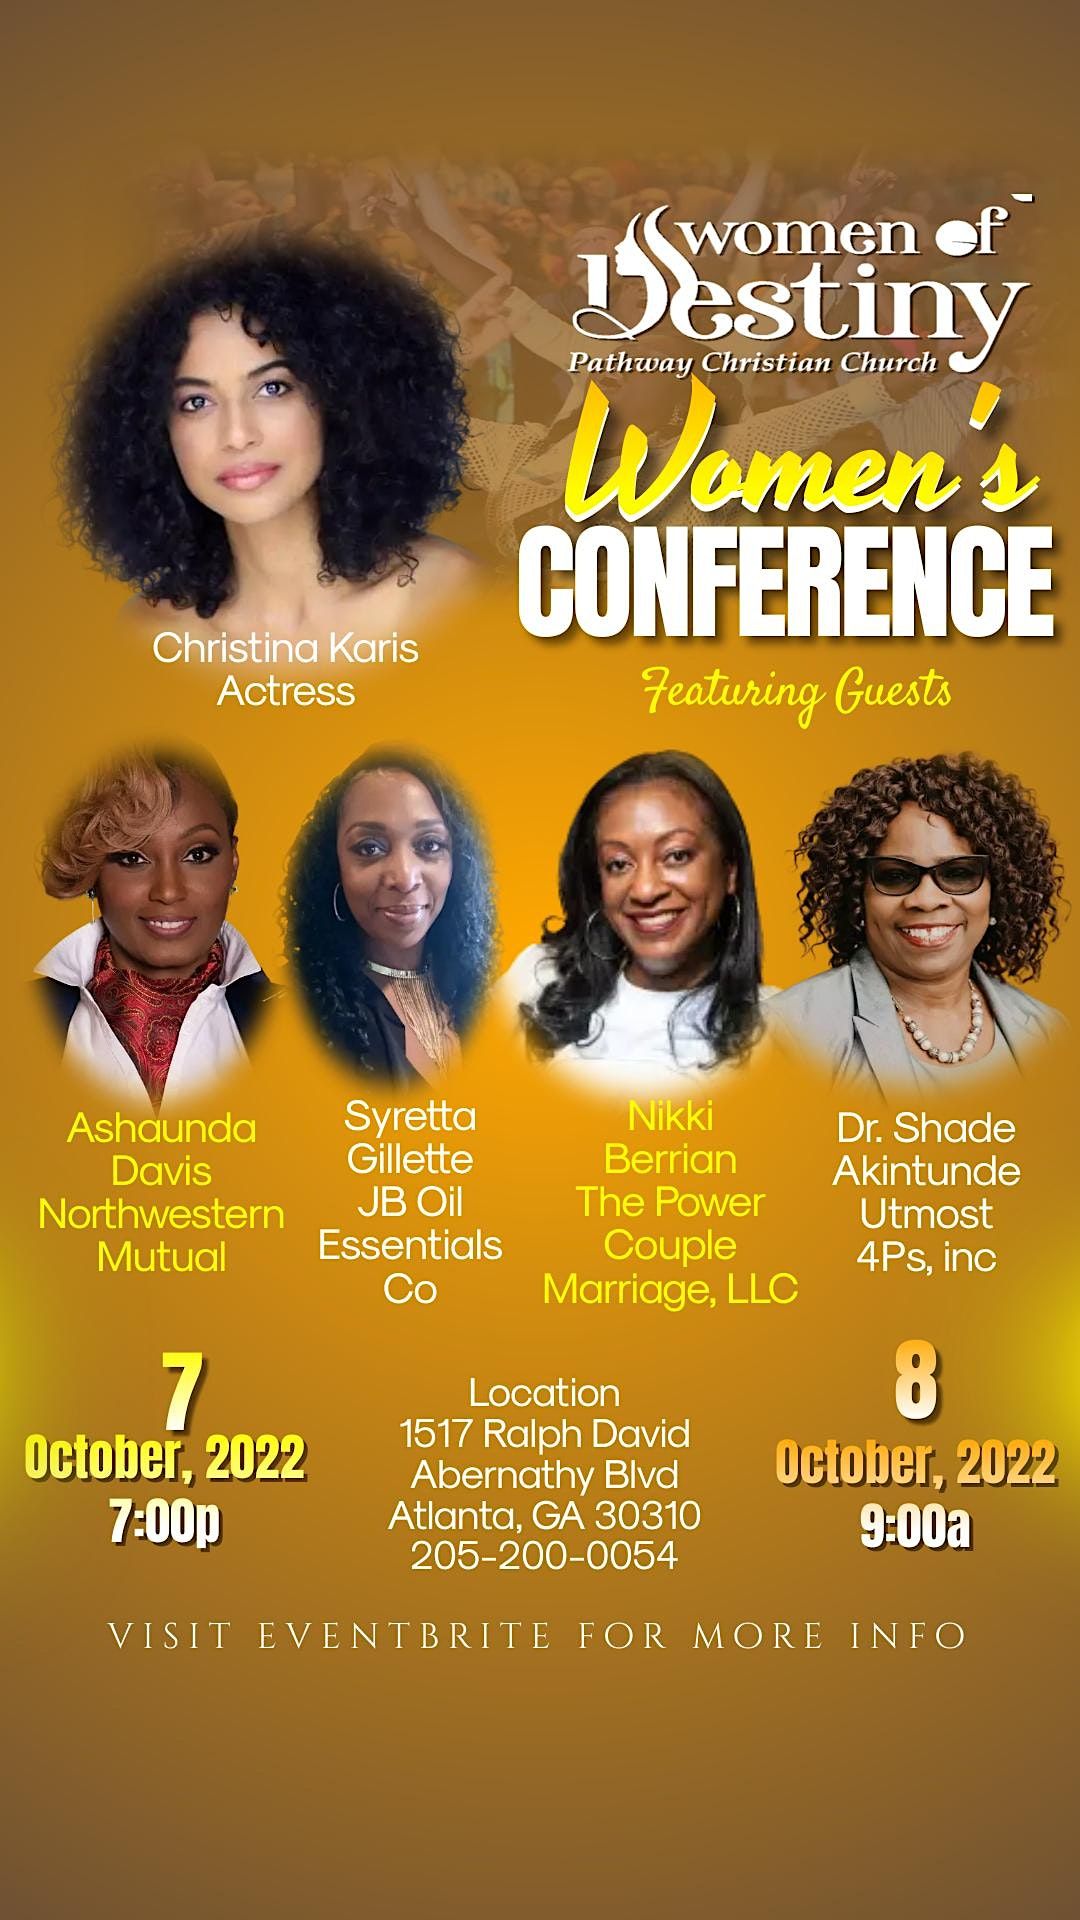 Pathway WOD Present "We Are Wonderfully Made By God" Women's Conference